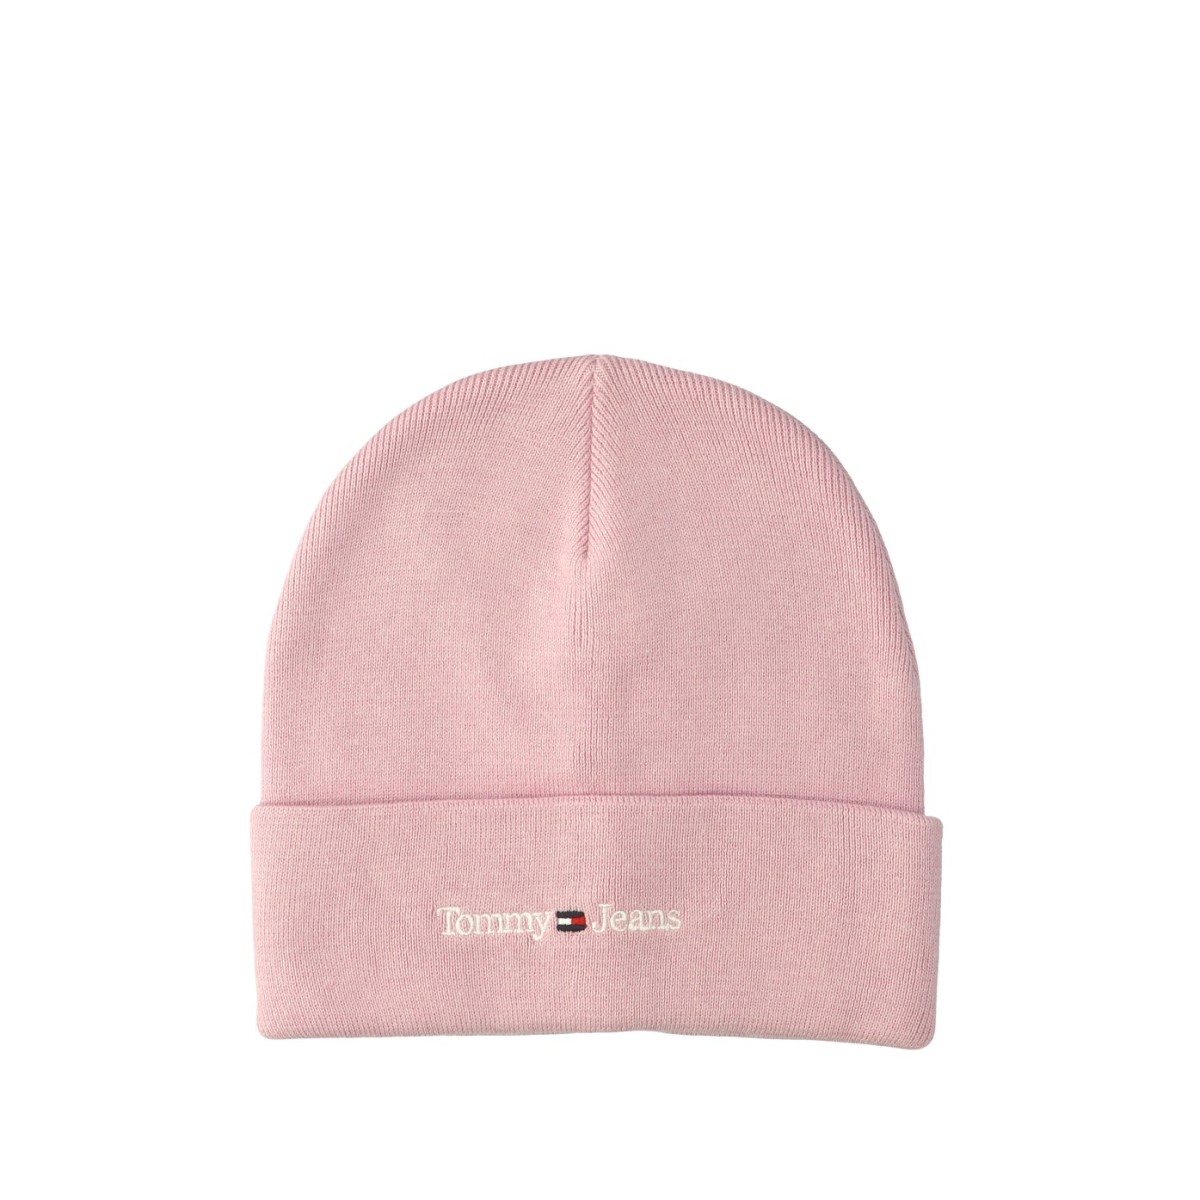 Tommy hilfiger Cappello Rosa AW0AW15473